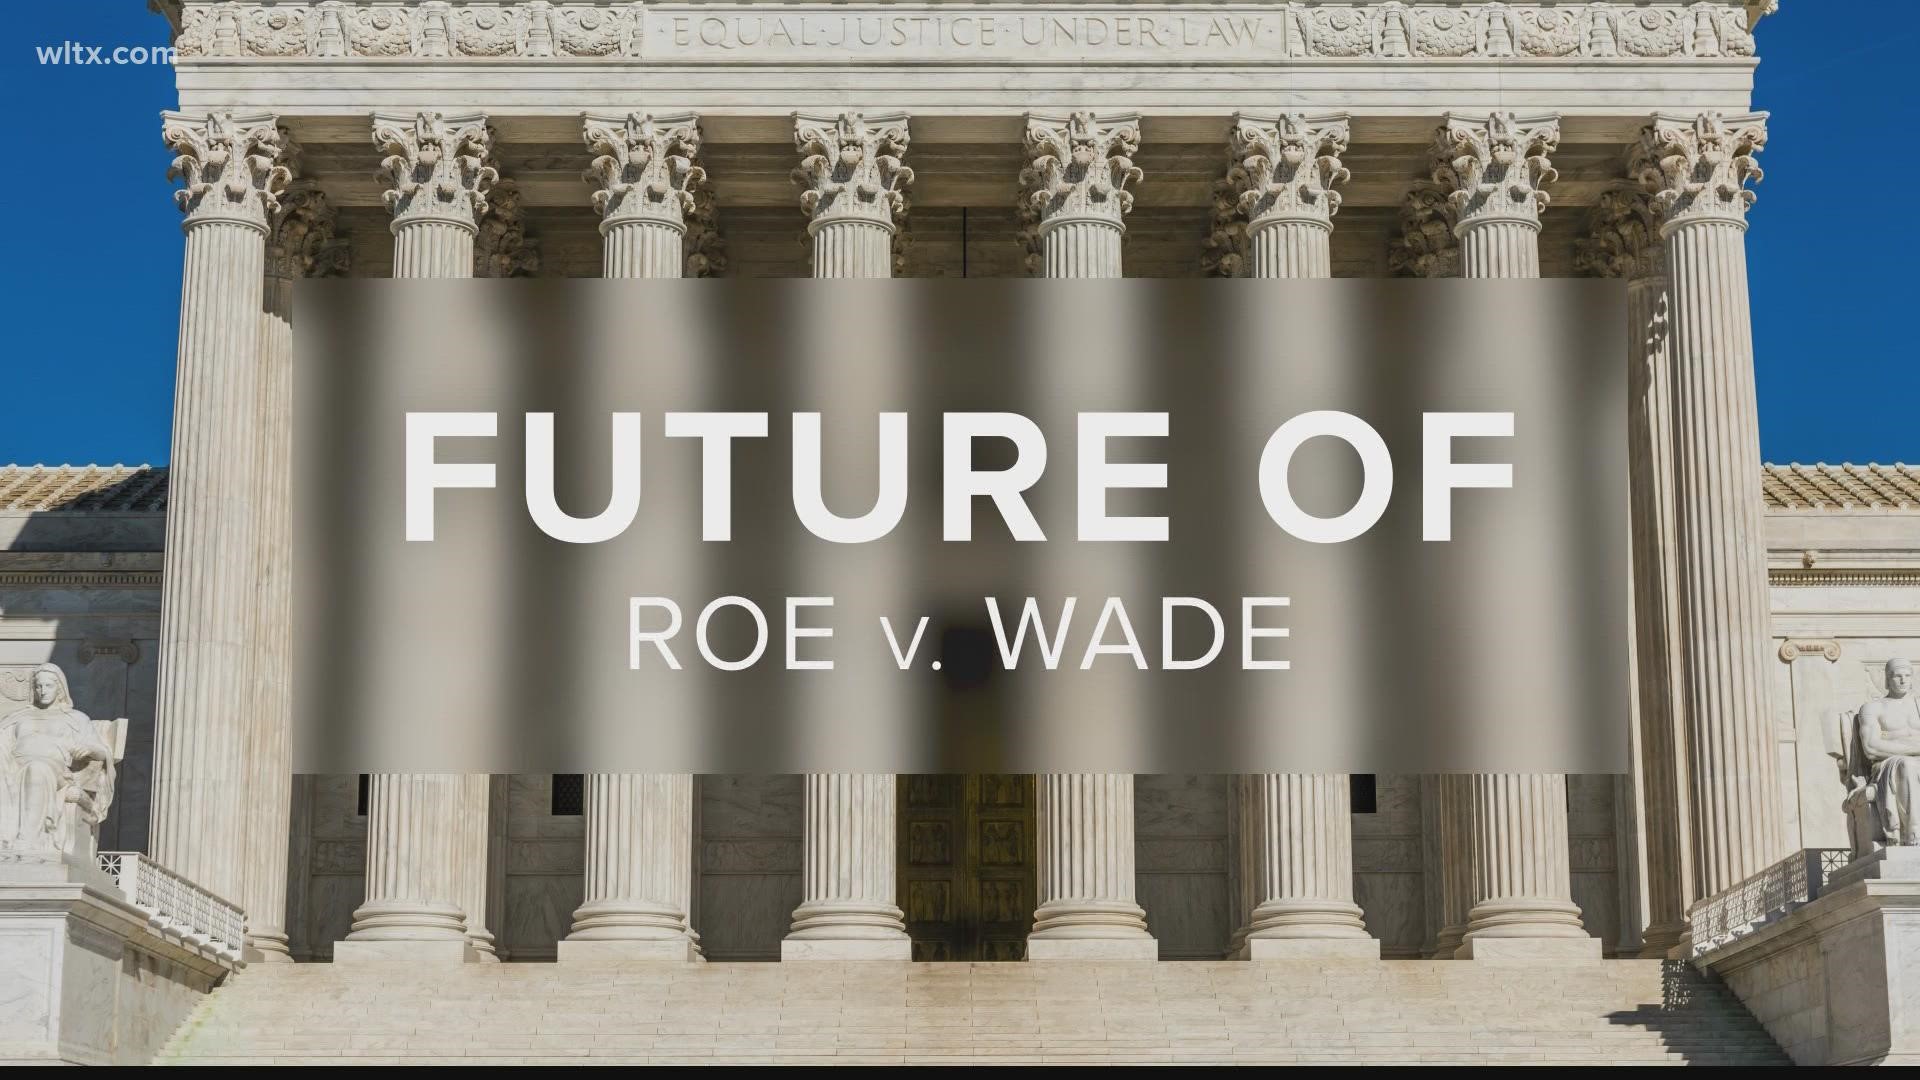 The Supreme Court ruling on the Mississippi abortion case challenging Roe v. Wade is expected any day now.